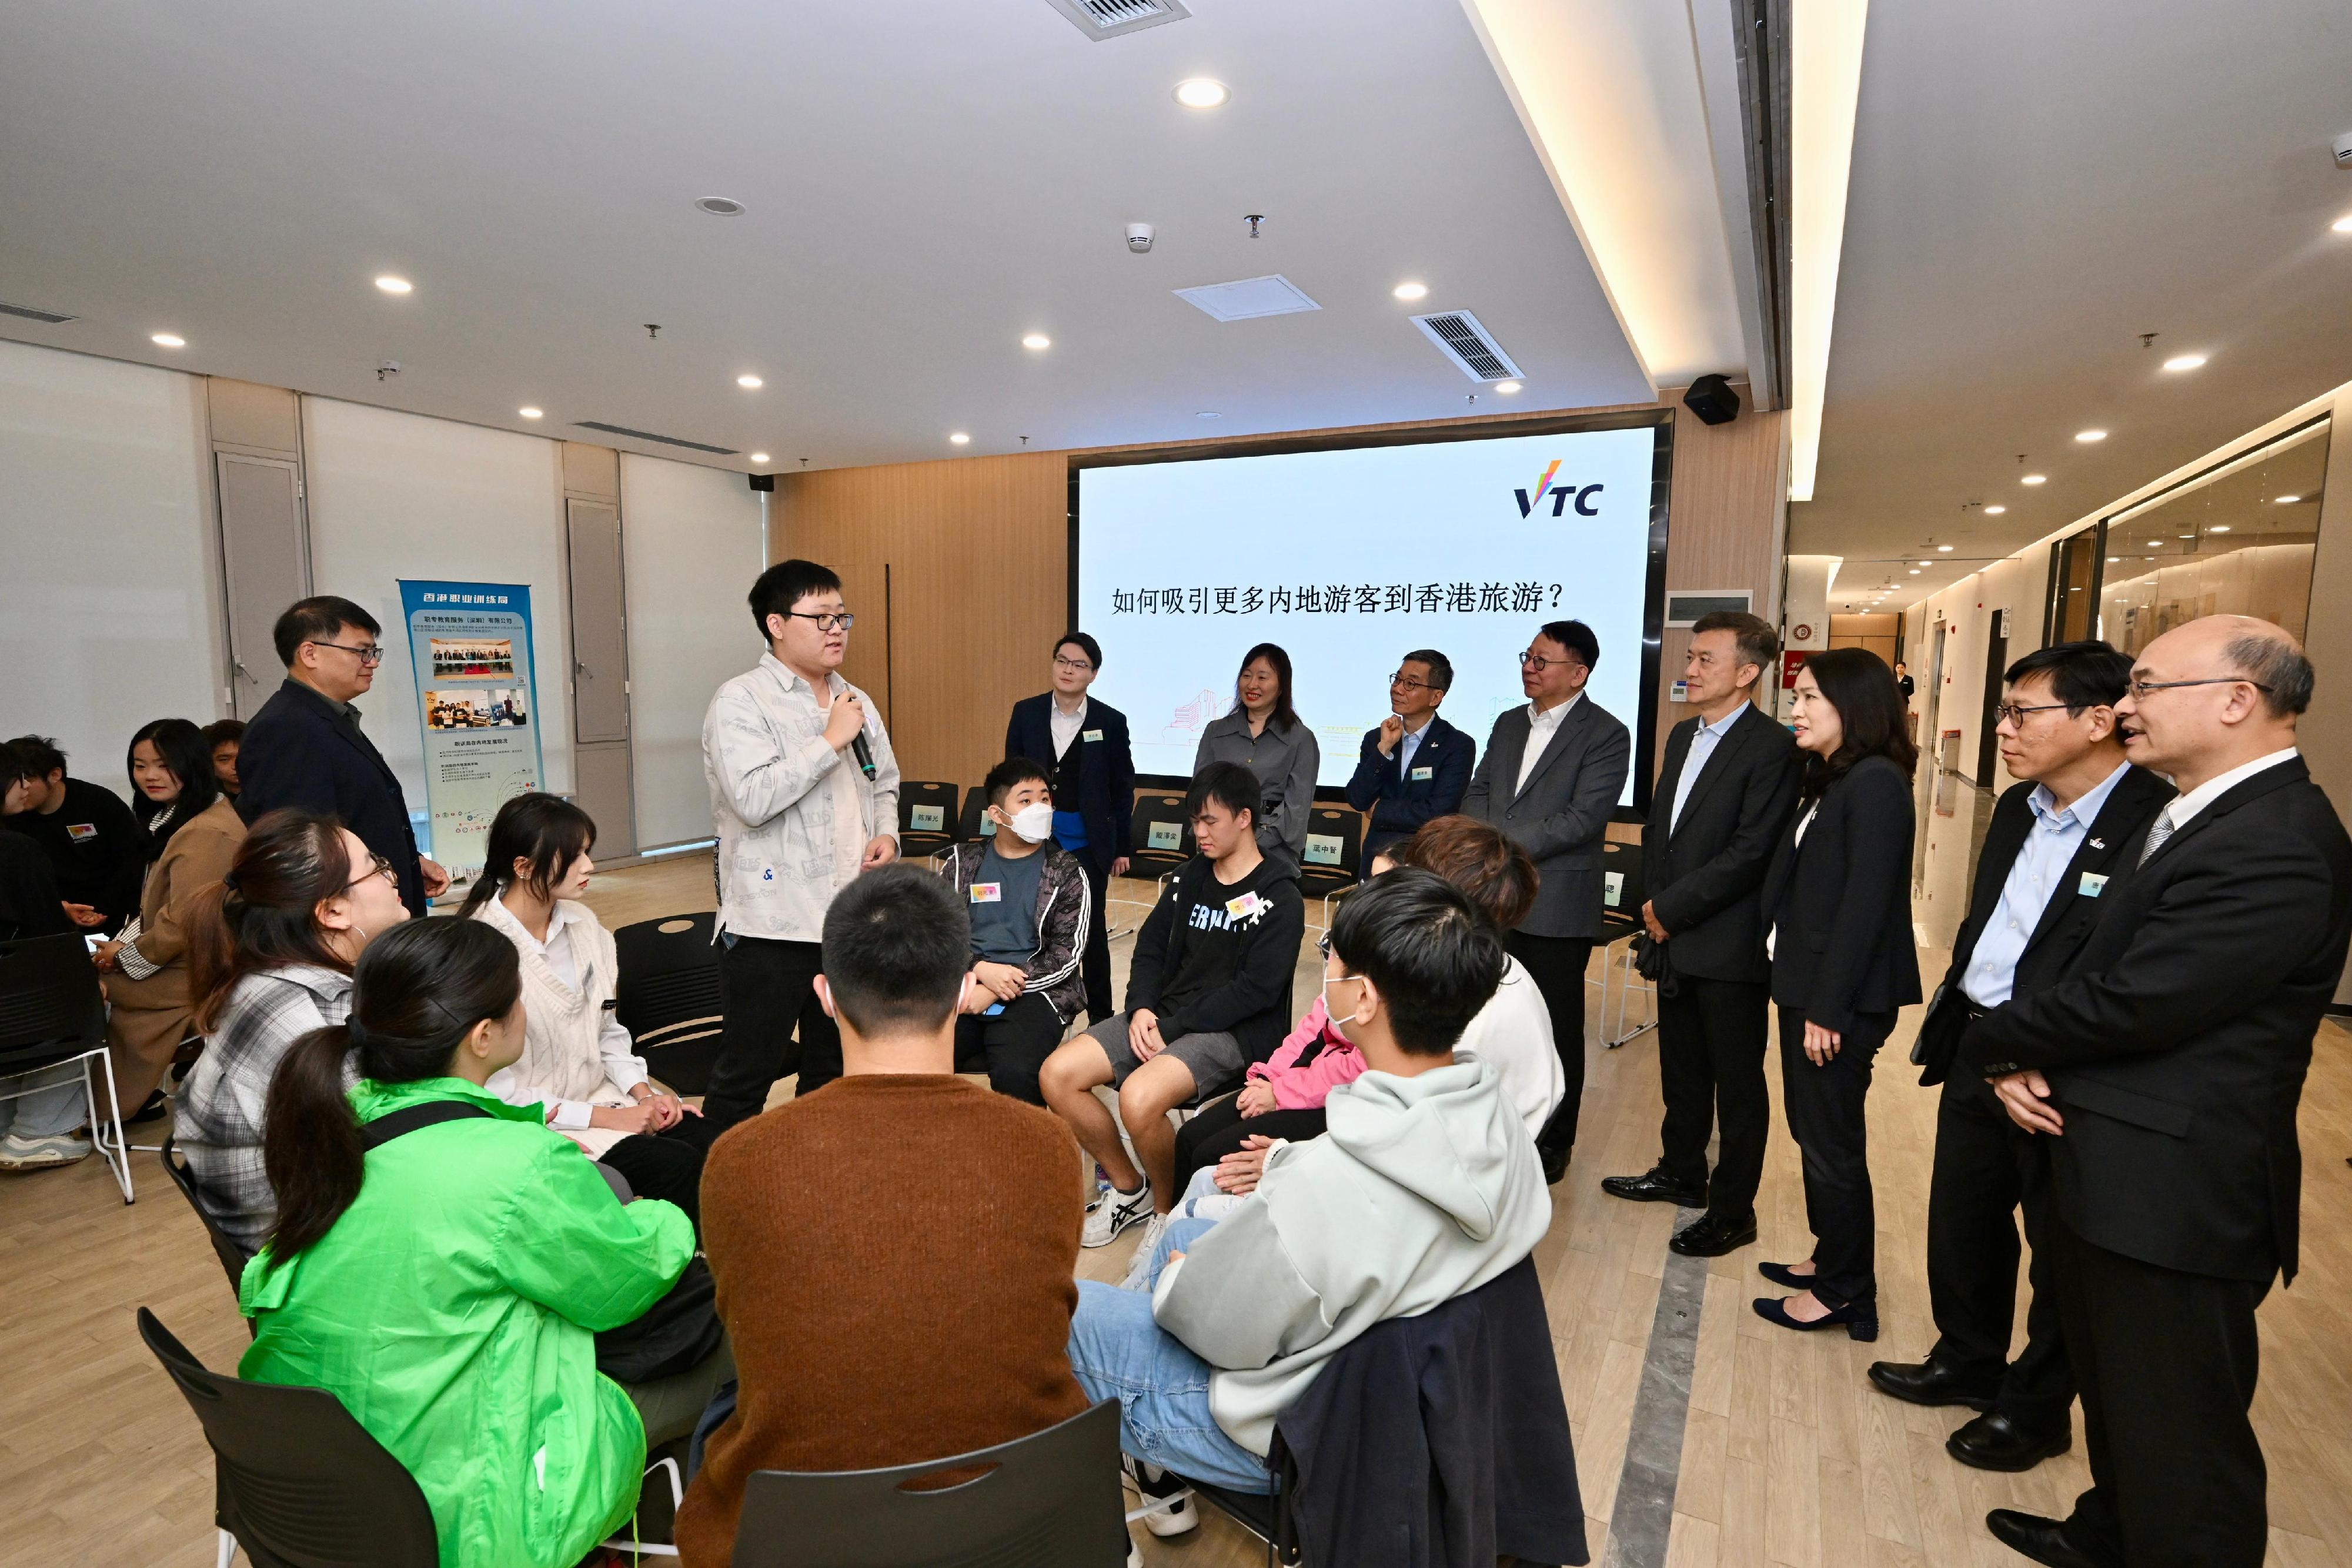 The Chief Secretary for Administration, Mr Chan Kwok-ki, today (January 10) visited Shenzhen and concluded his visit to Mainland cities of the Guangdong-Hong Kong-Macao Greater Bay Area. Photo shows Mr Chan (fifth right) exchanging views with students of the Hong Kong Vocational Training Council and the Shenzhen Polytechnic University at the Vocational and Professional Education Services (Shenzhen) Company Limited.